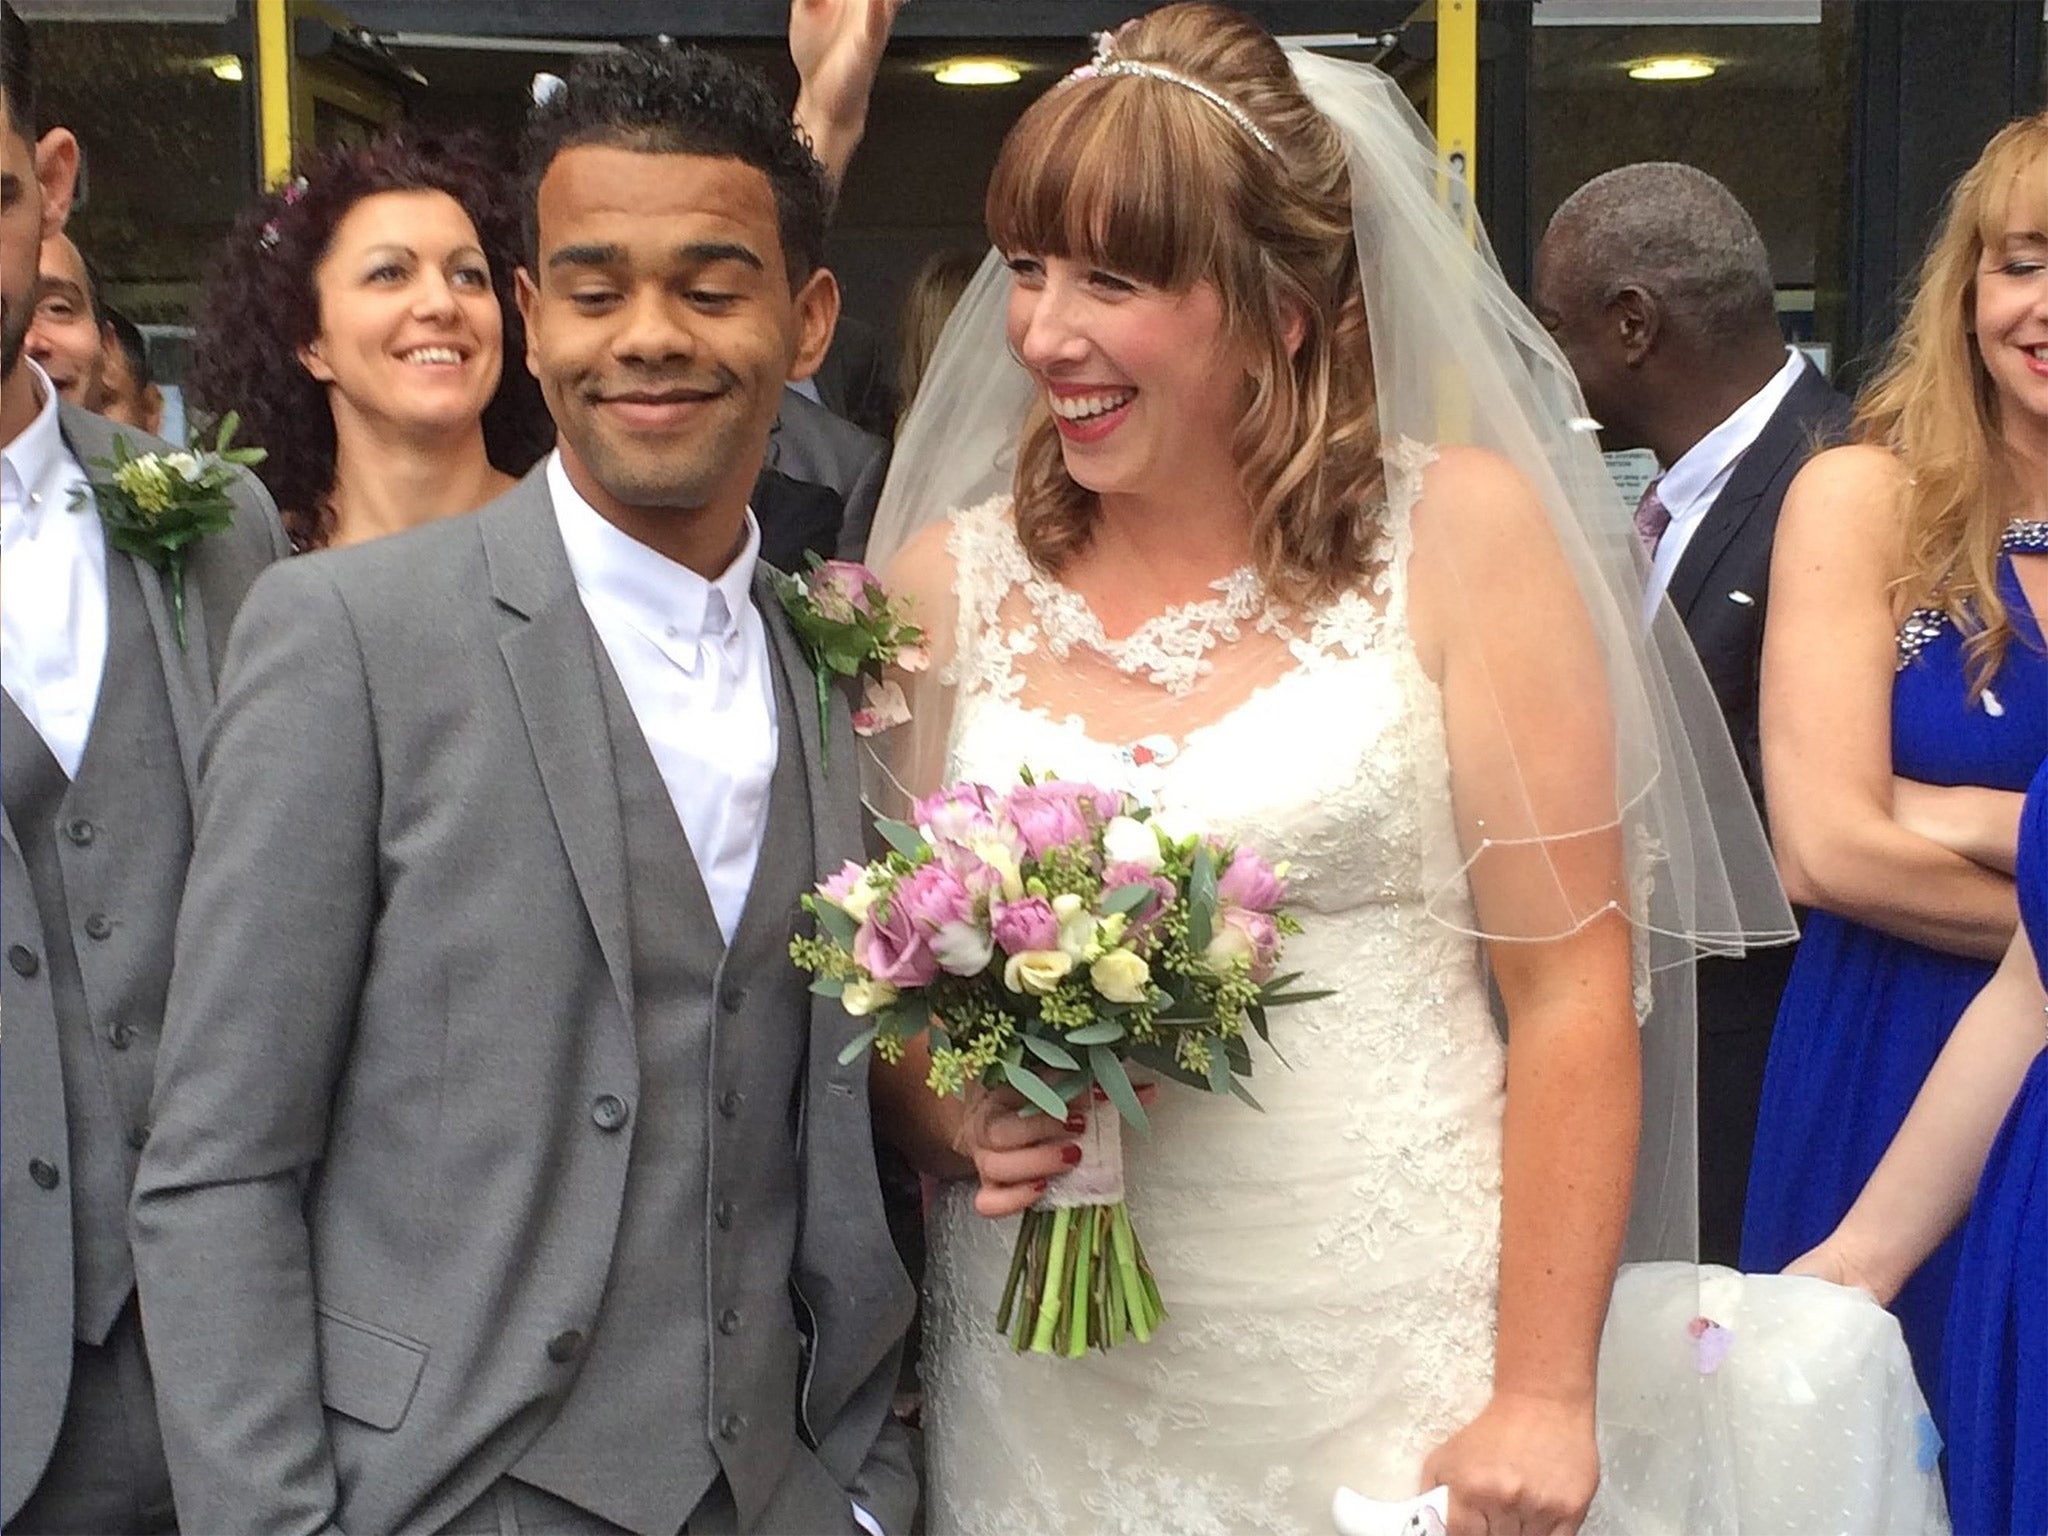 The formula retains its magic as Andrew and Jenni get married